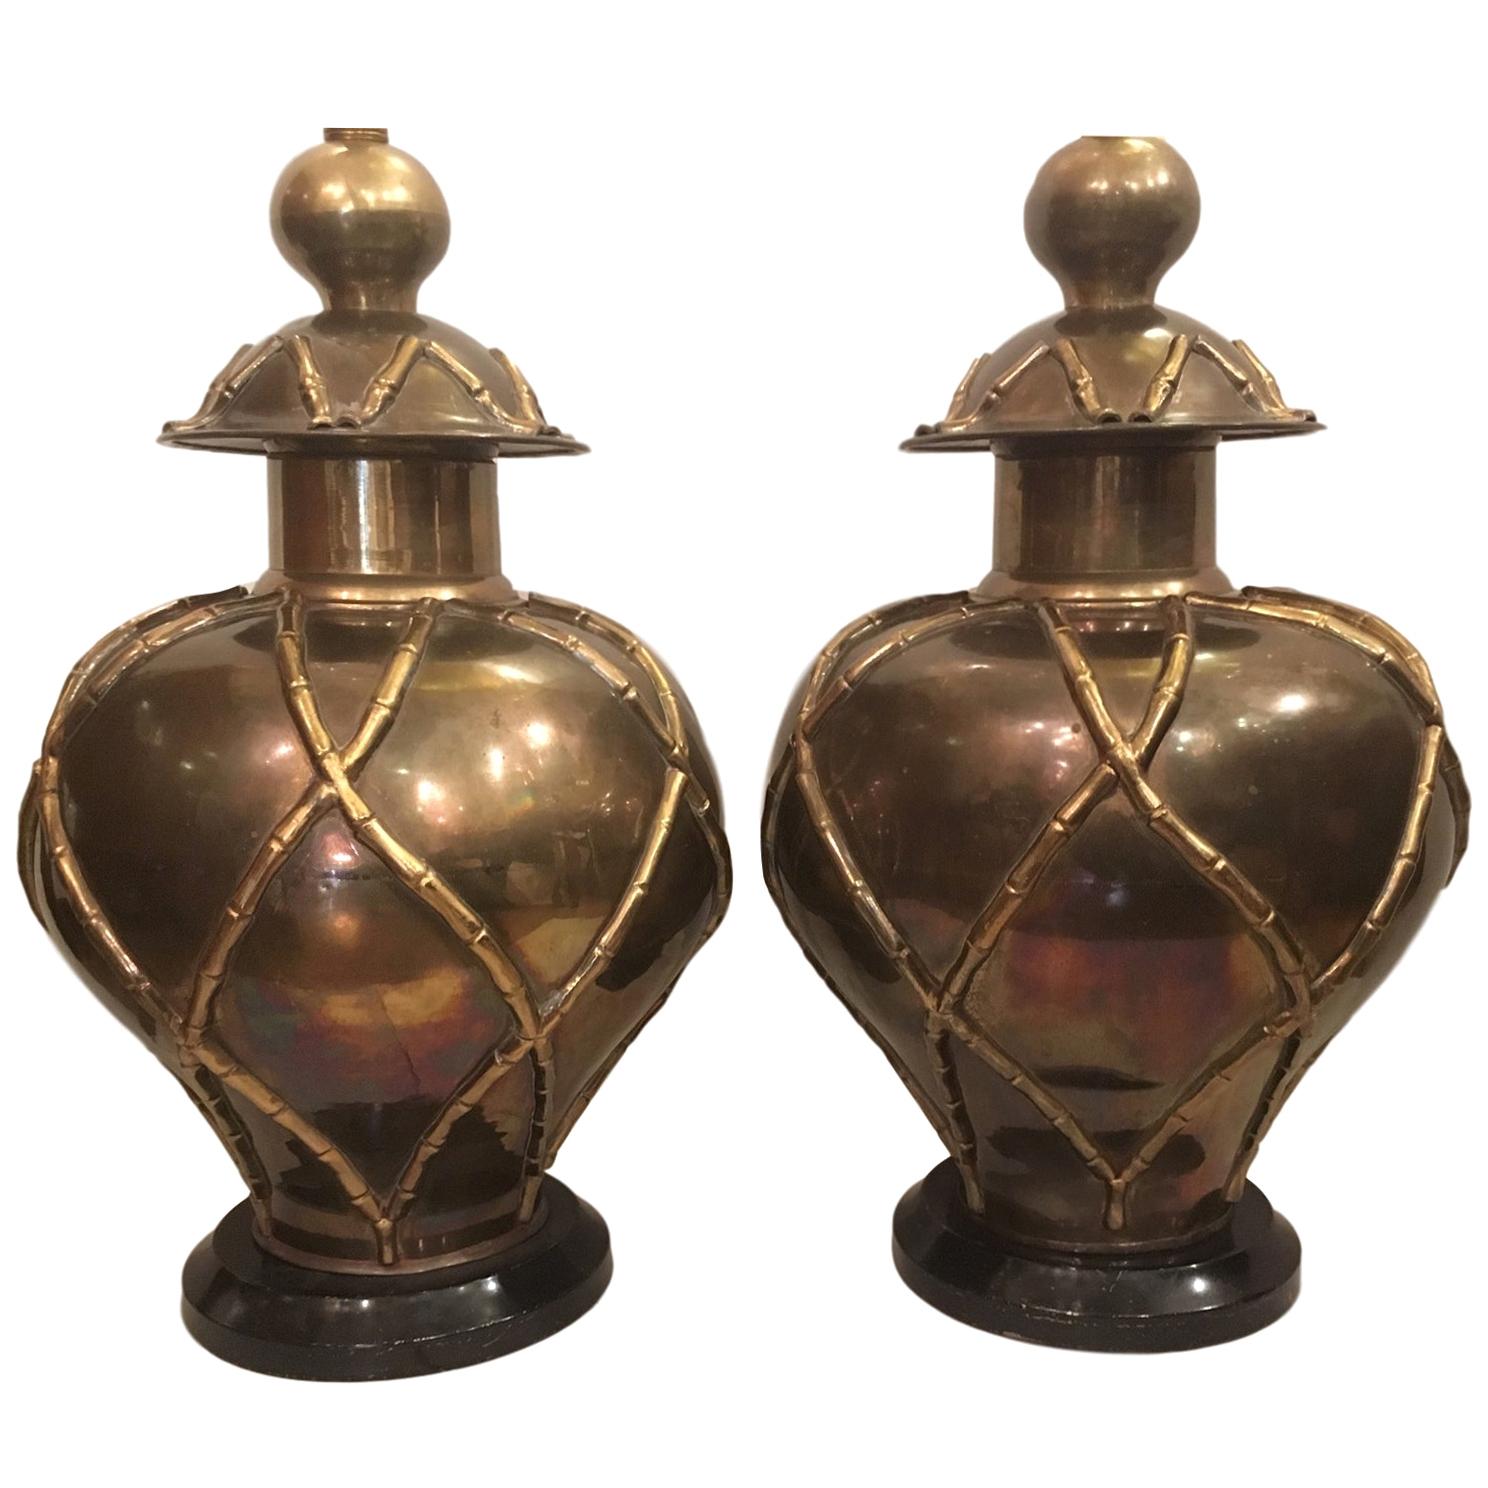 Pair of large circa 1940's French brass table lamps with hammered bamboo pattern on body, original patina and wooden bases.

Measurements:
Height of body: 23